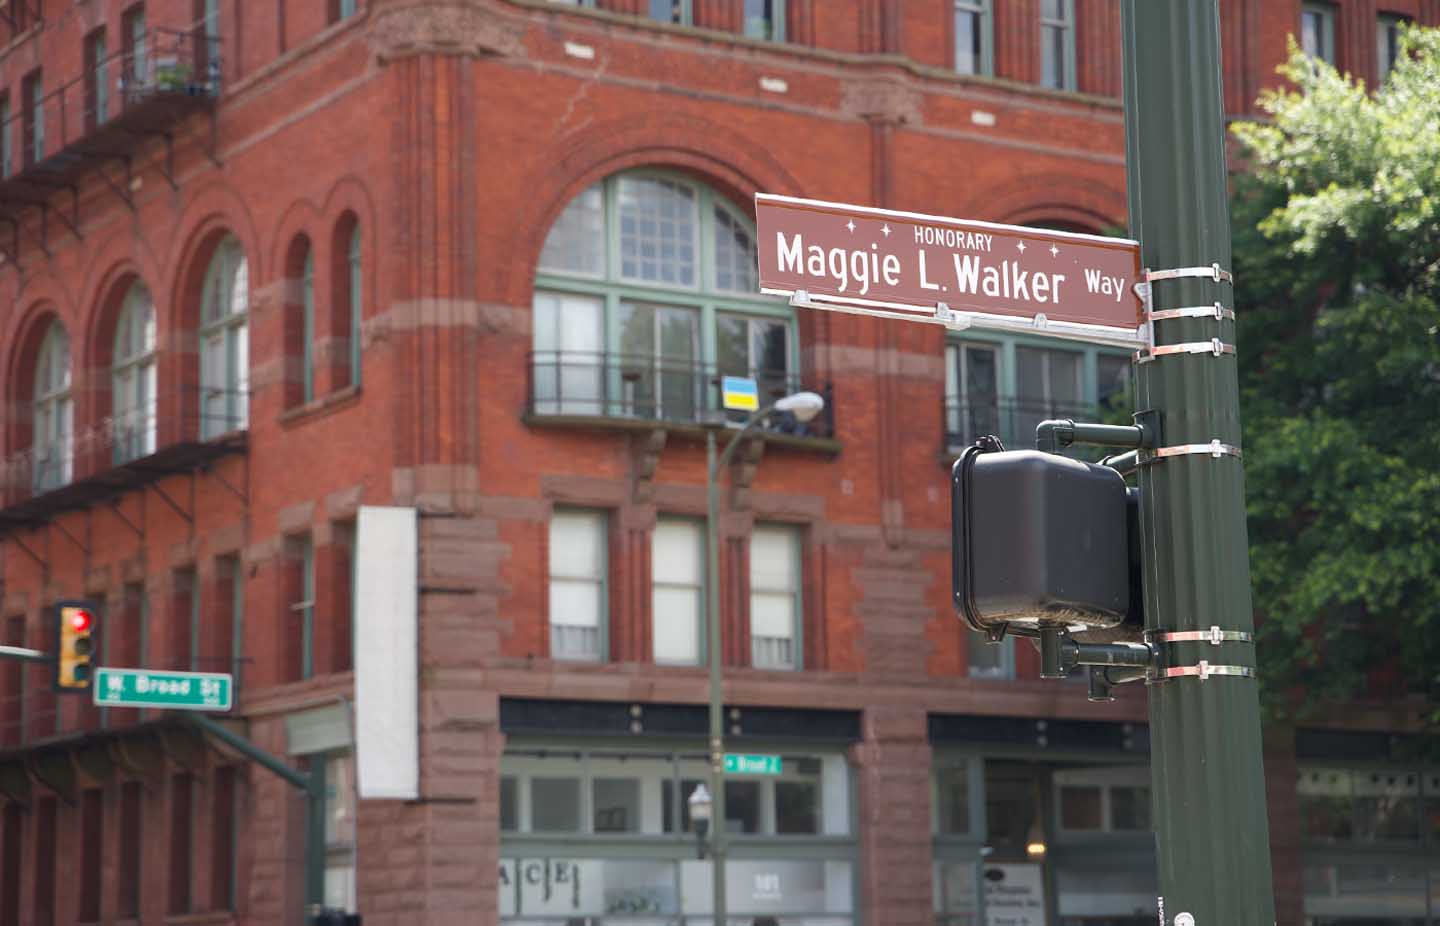 Maggie Walker’s honorary street sign at East Broad and Adams streets in Richmond Virginia